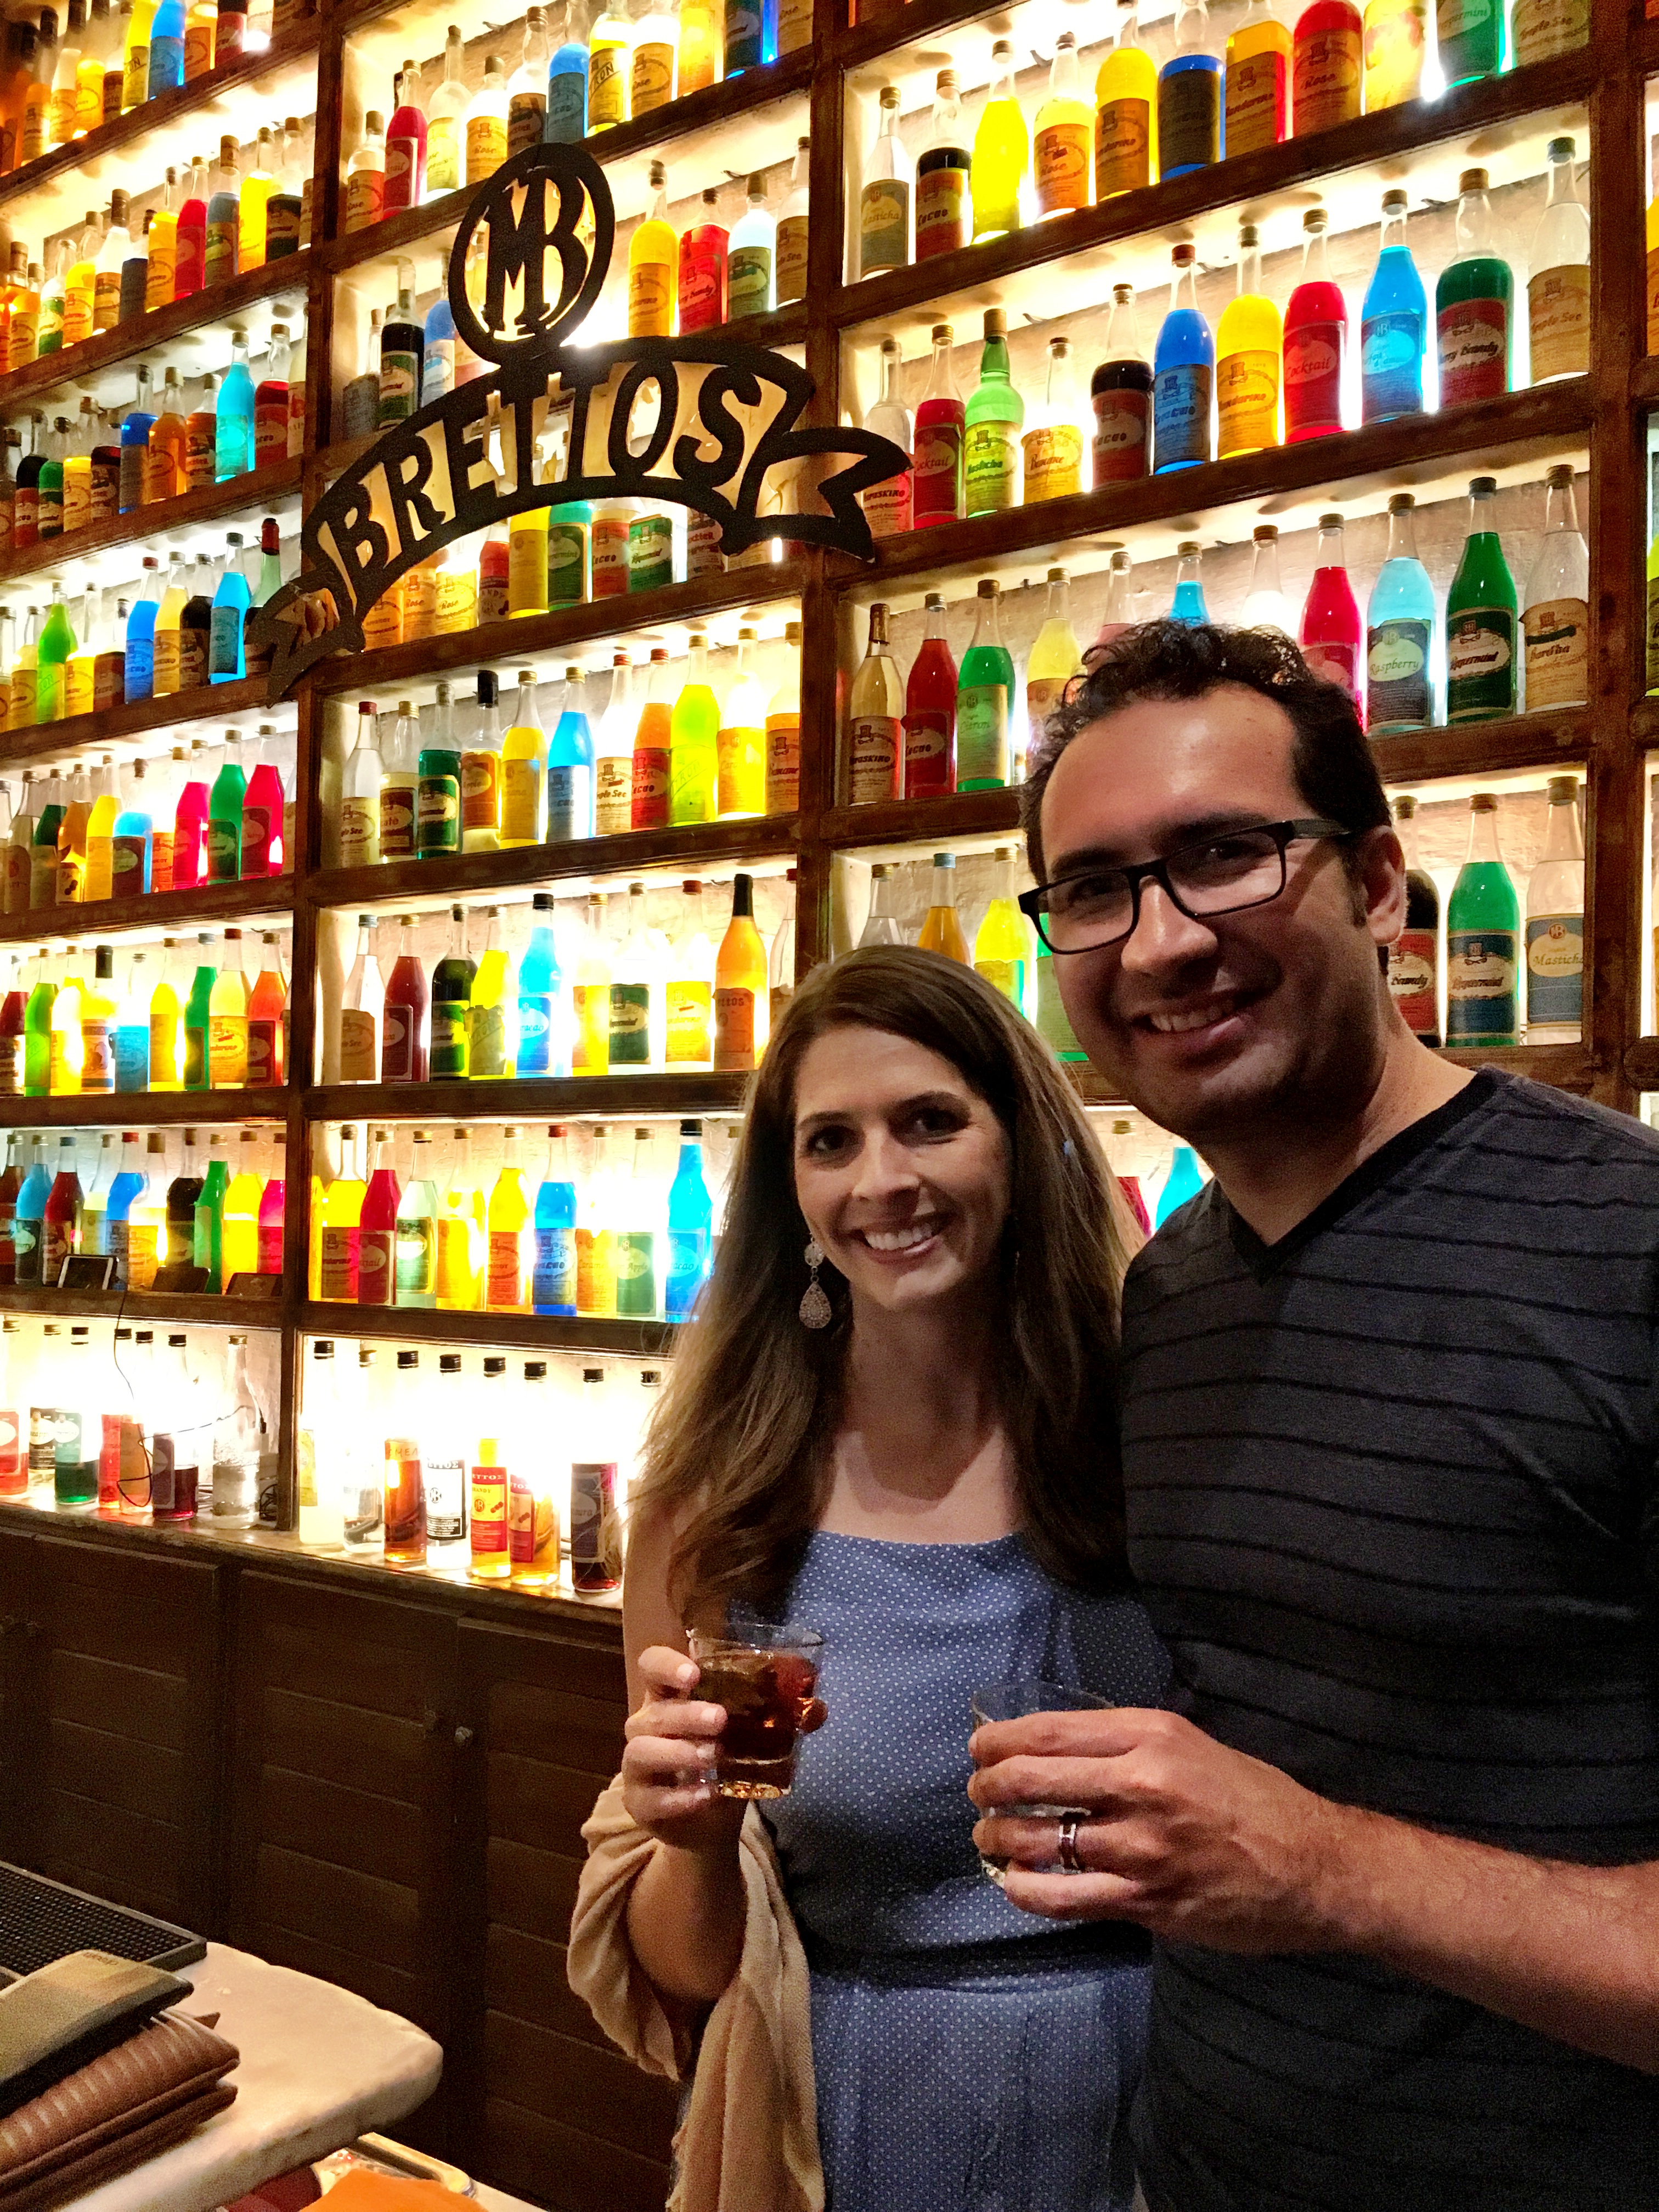 Visit Bretto's Distillery: The oldest and most colorful bar in Athens, Greece